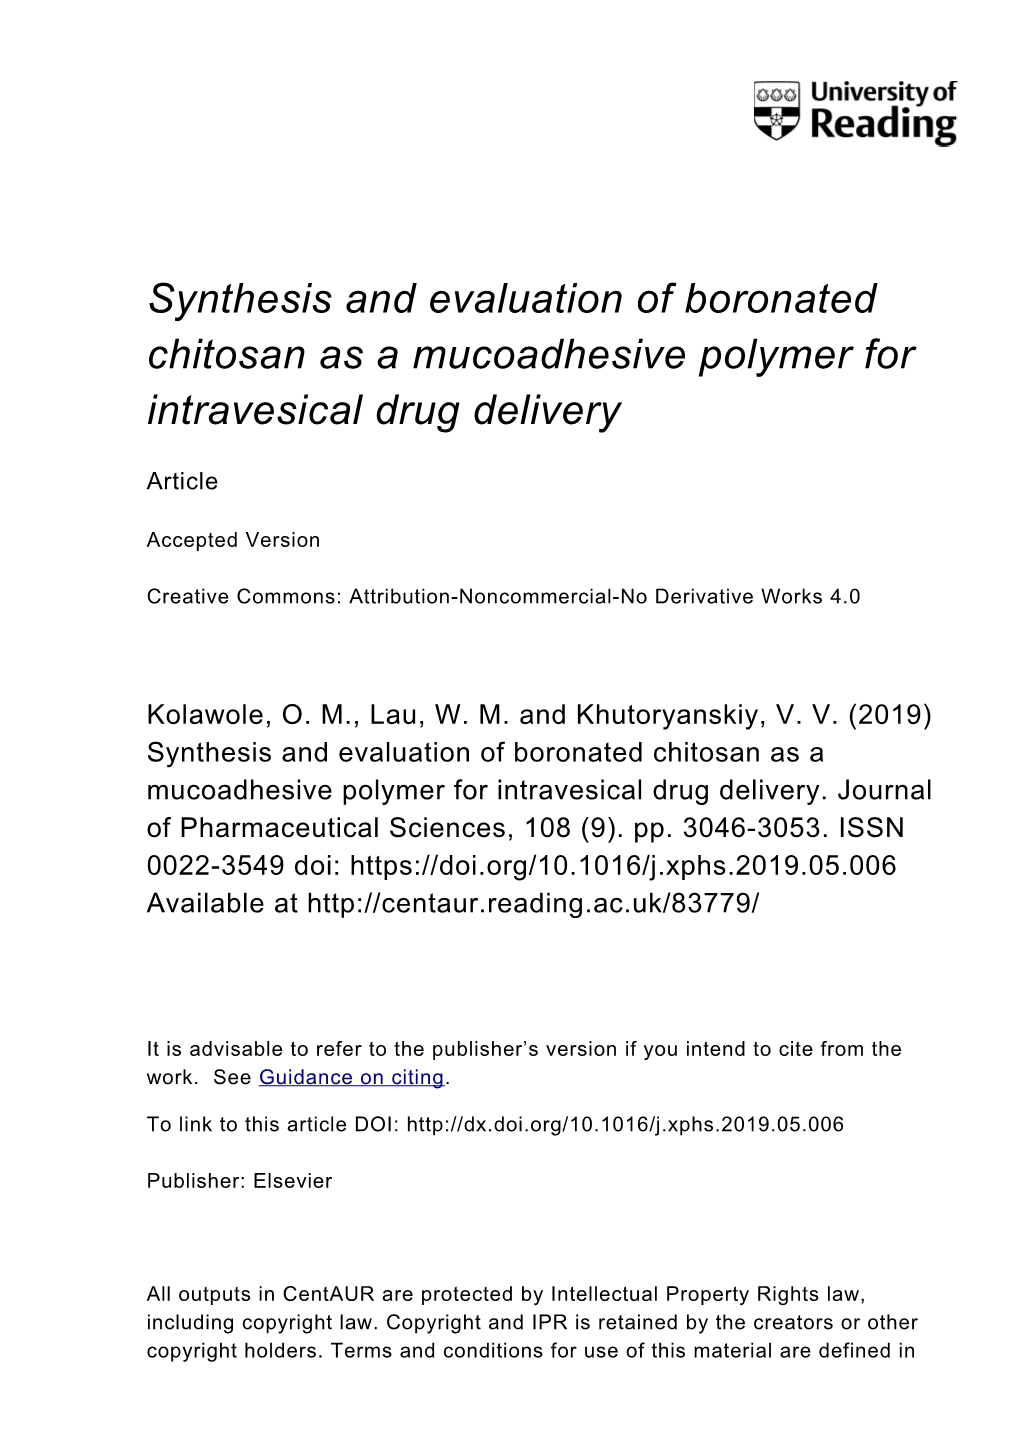 Synthesis and Evaluation of Boronated Chitosan As a Mucoadhesive Polymer for Intravesical Drug Delivery